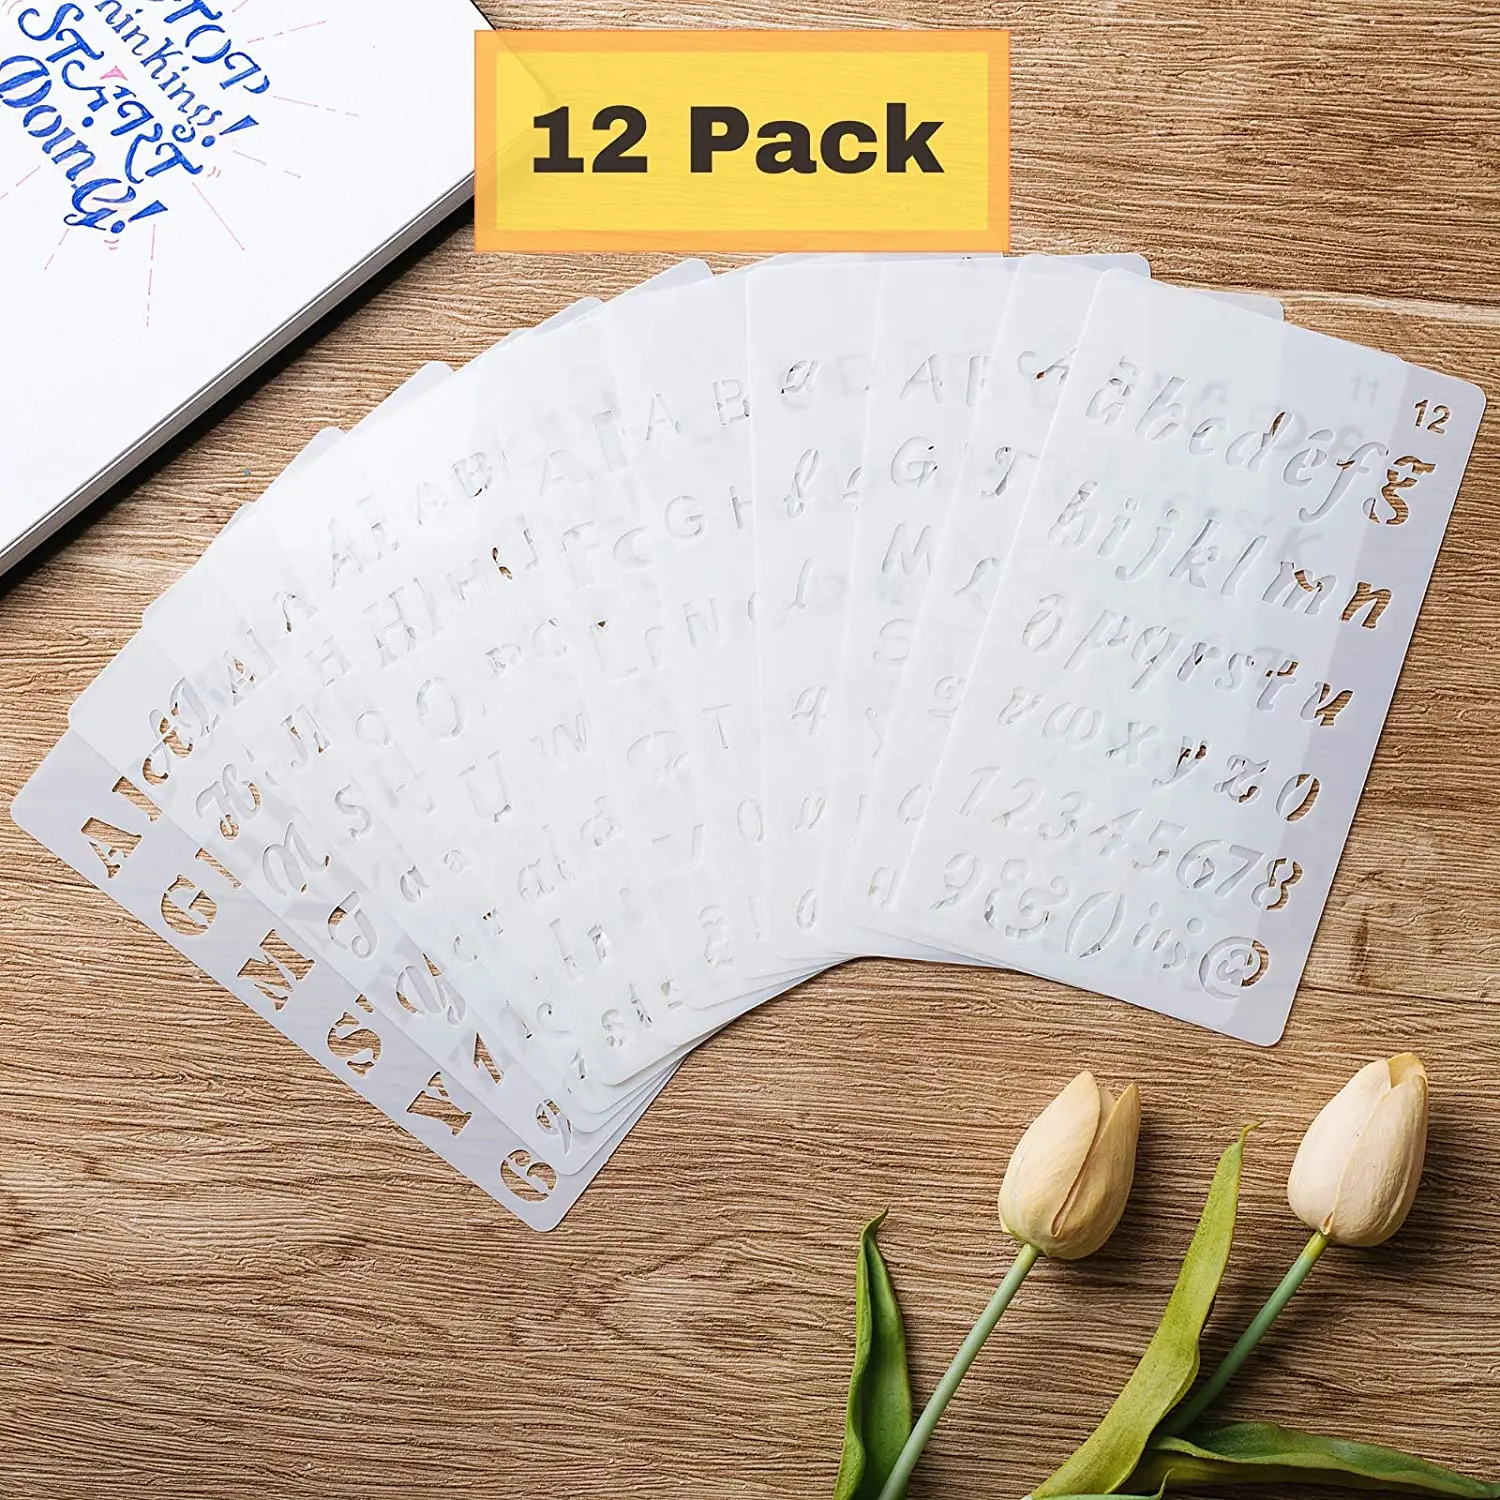 12 Pack Alphabets Journal Stencils for Journals,Travel, Daily Diary